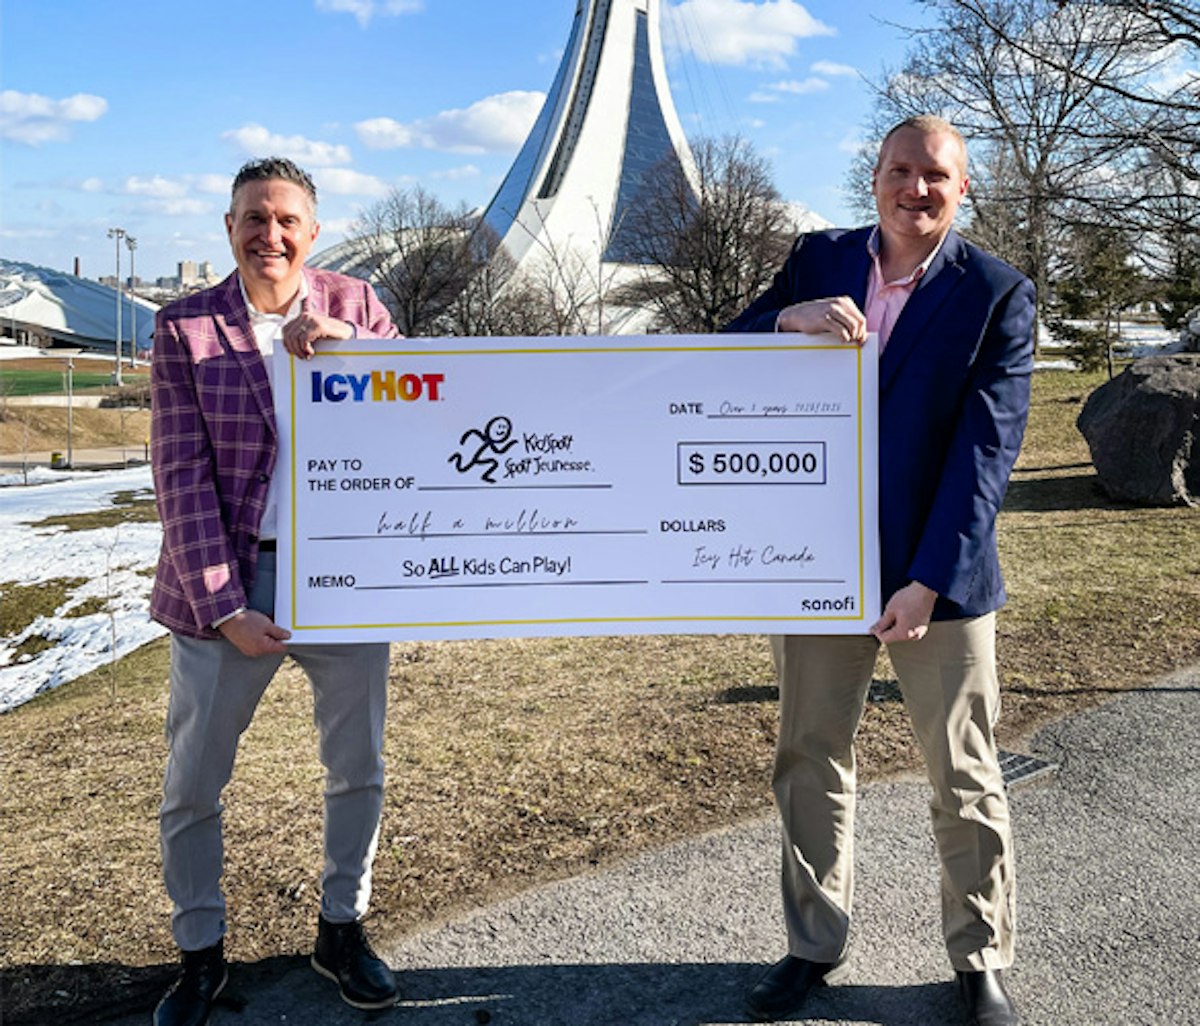 Two individuals holding a large ceremonial check for a donation of $500,000 from icyhot to kidsport.